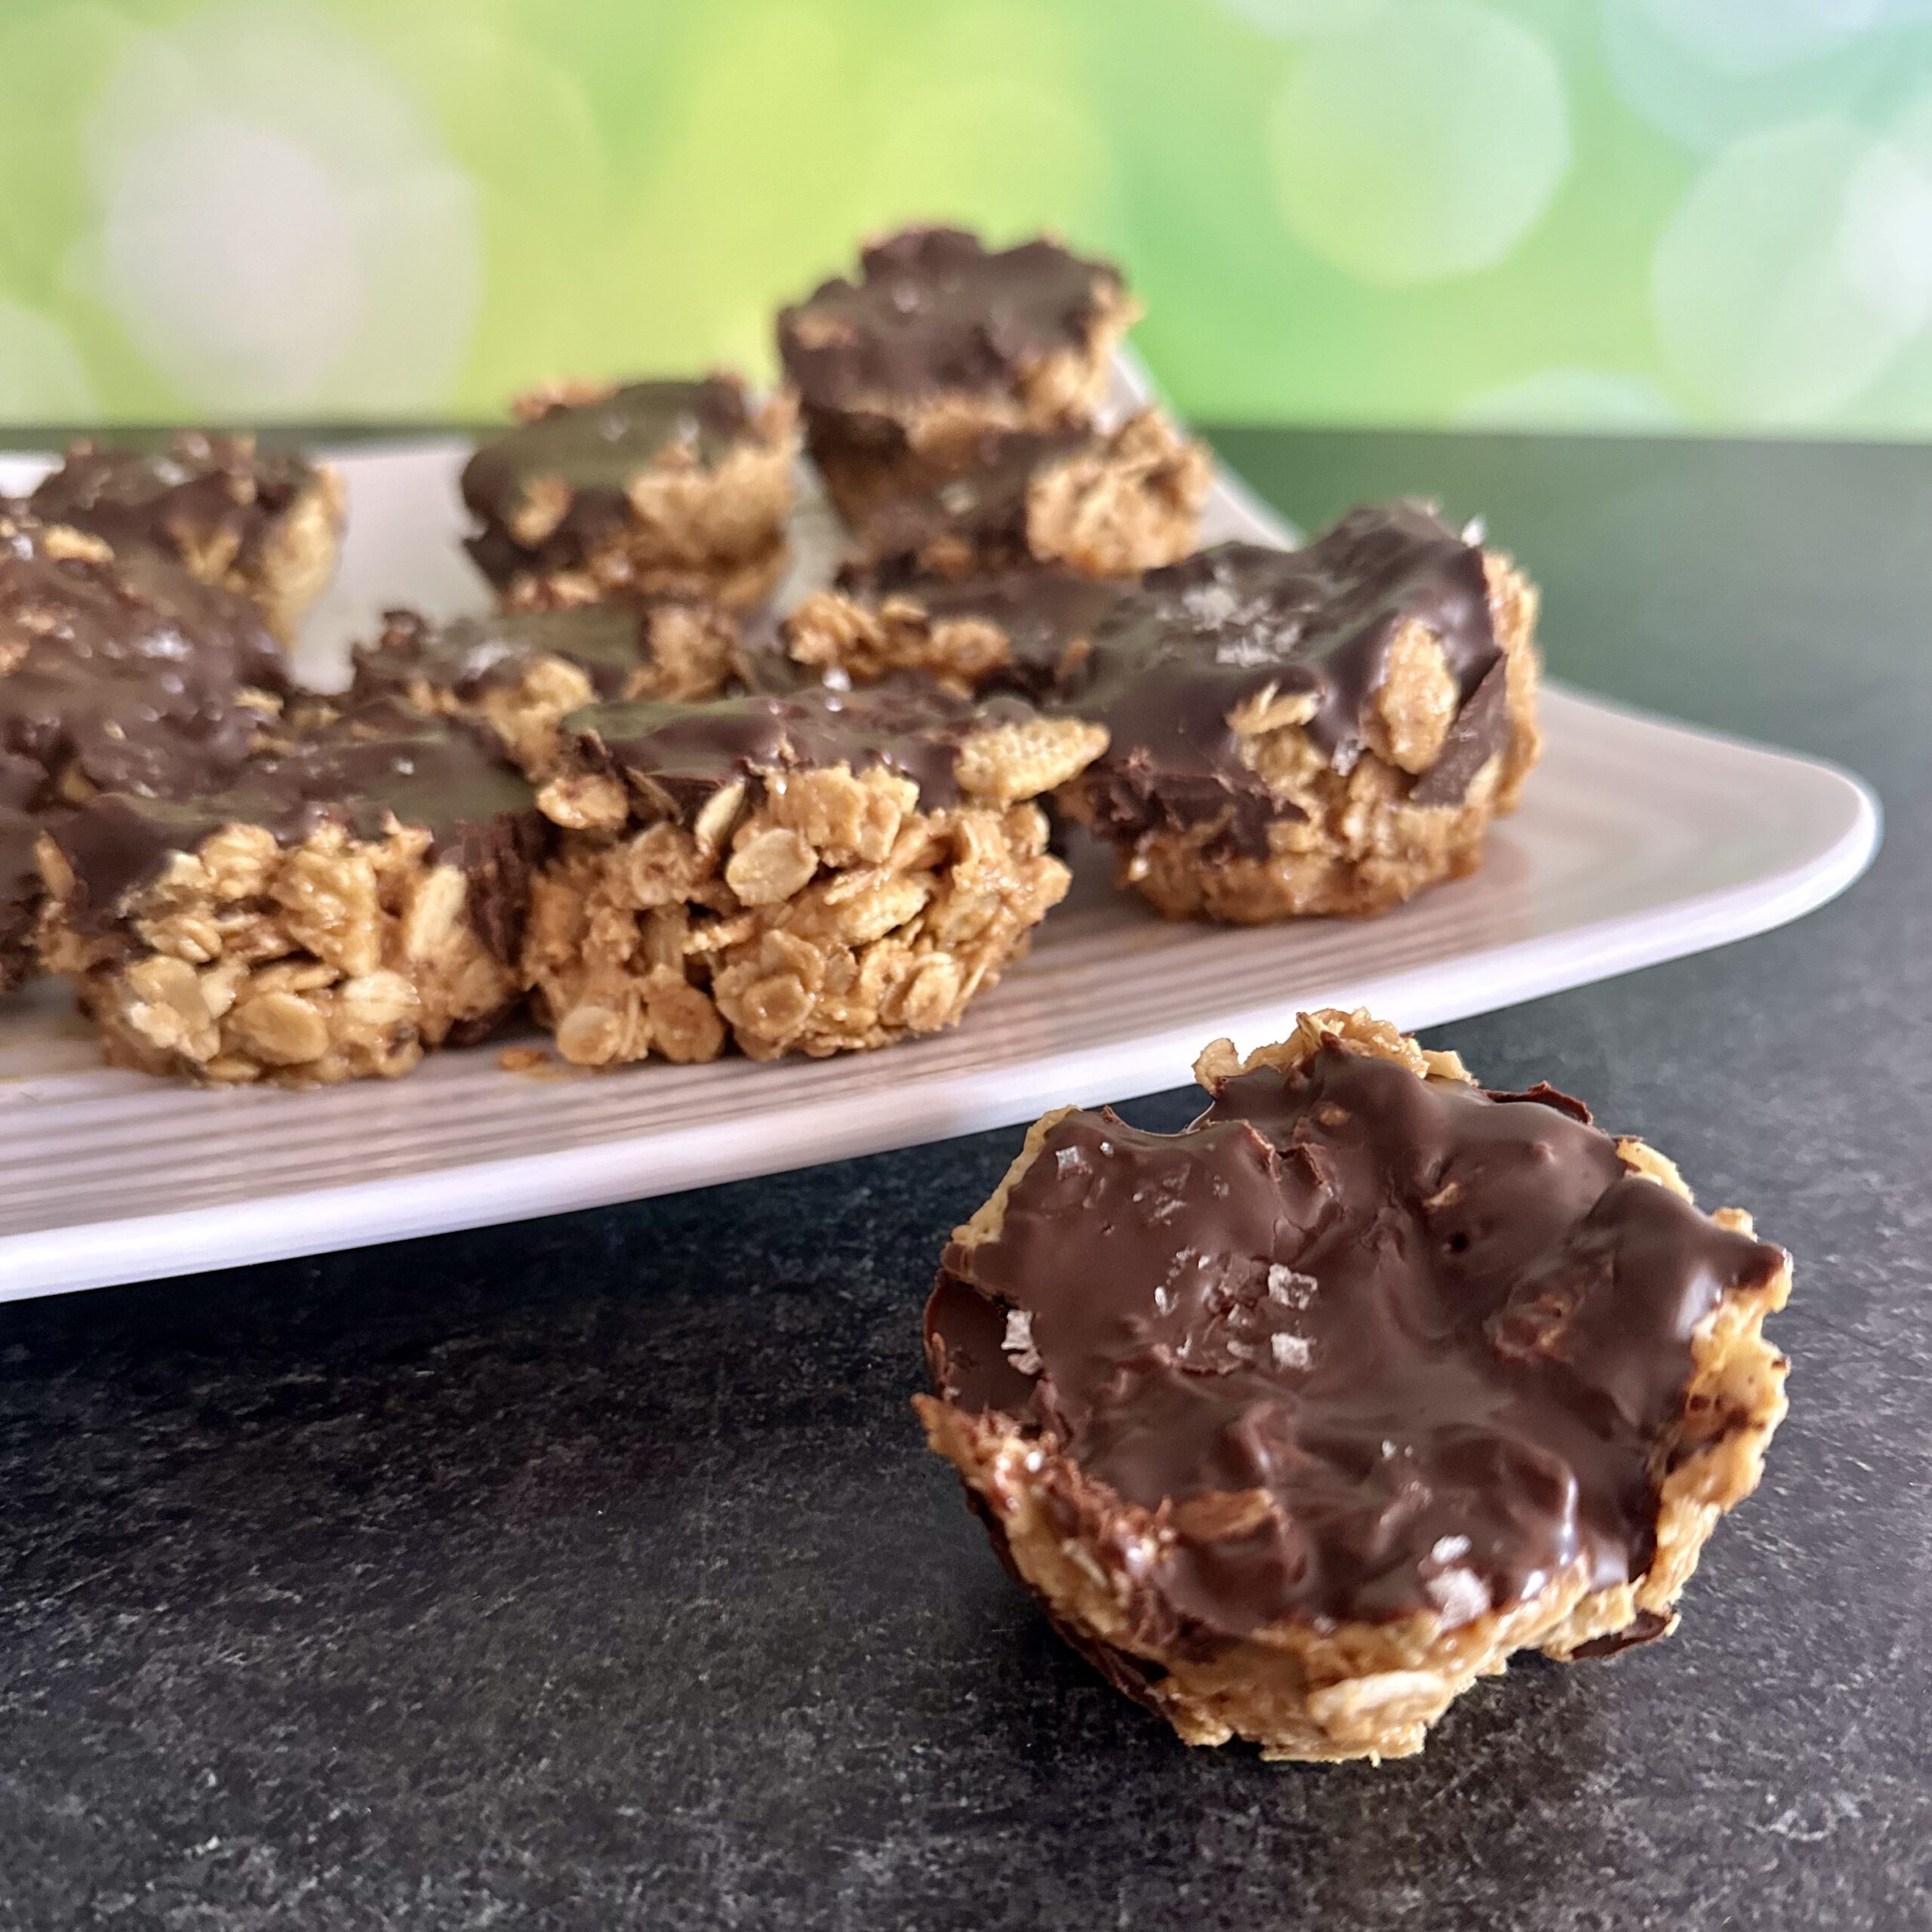 Peanut Butter Chocolate Oat Cups will satisfy your craving for a treat without added sugars or processed junk. And you don't have to turn on the oven!